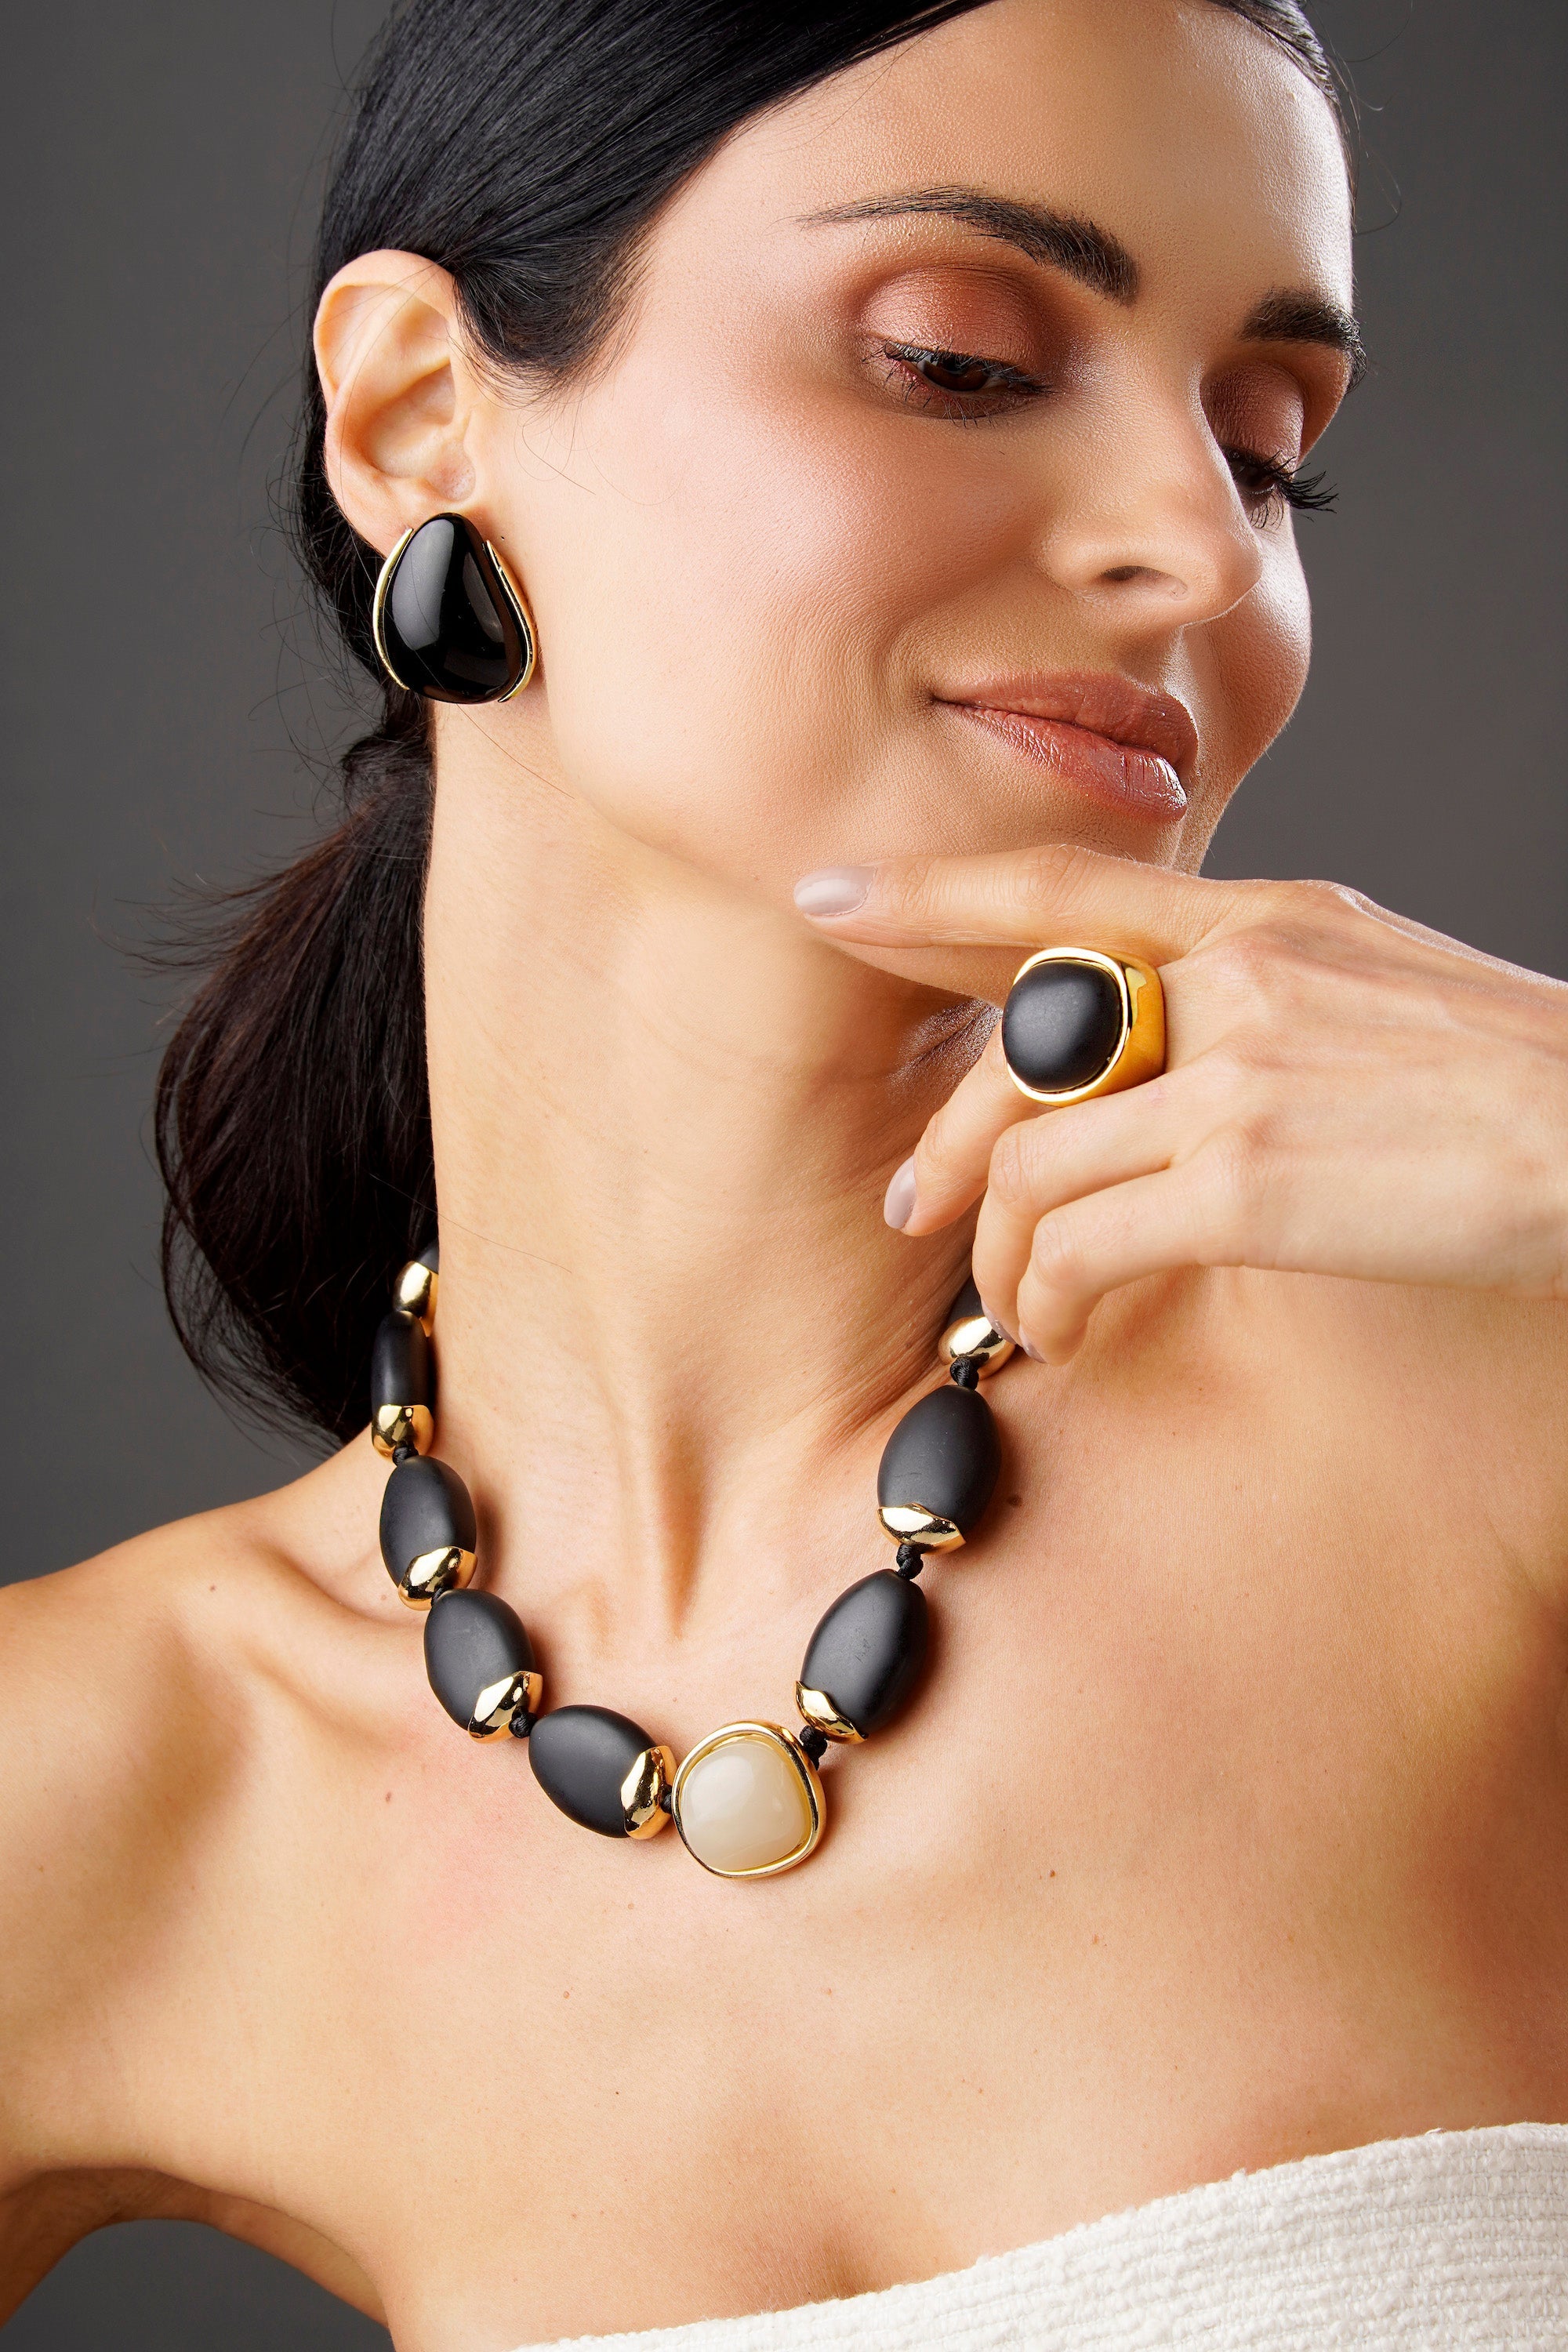 Resin Beads Necklace - Black and Sand